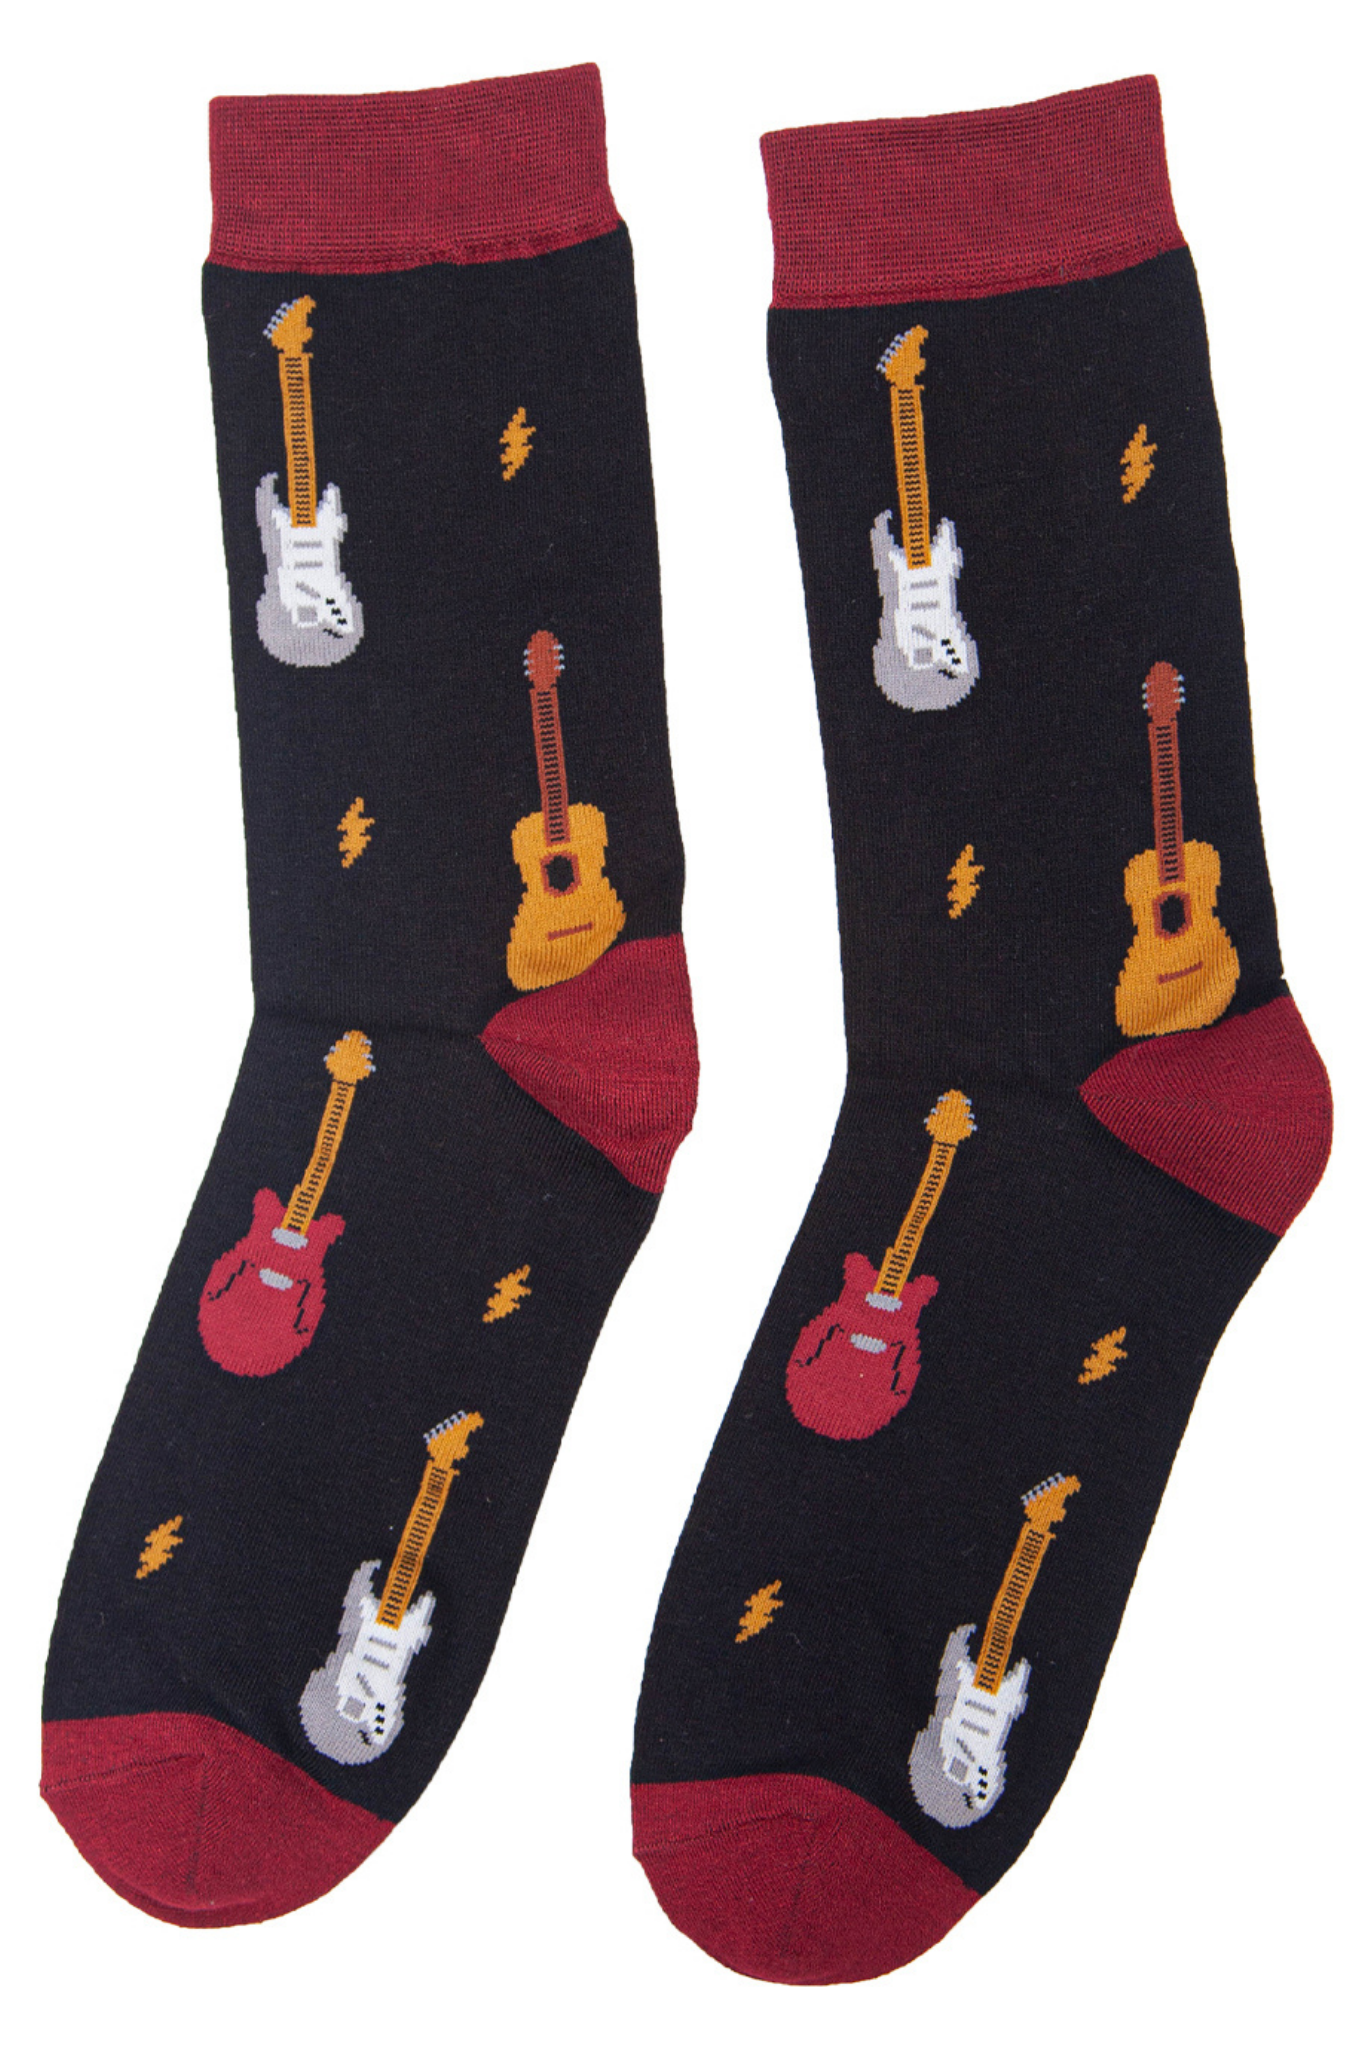 bamboo socks with an all over guitar print pattern